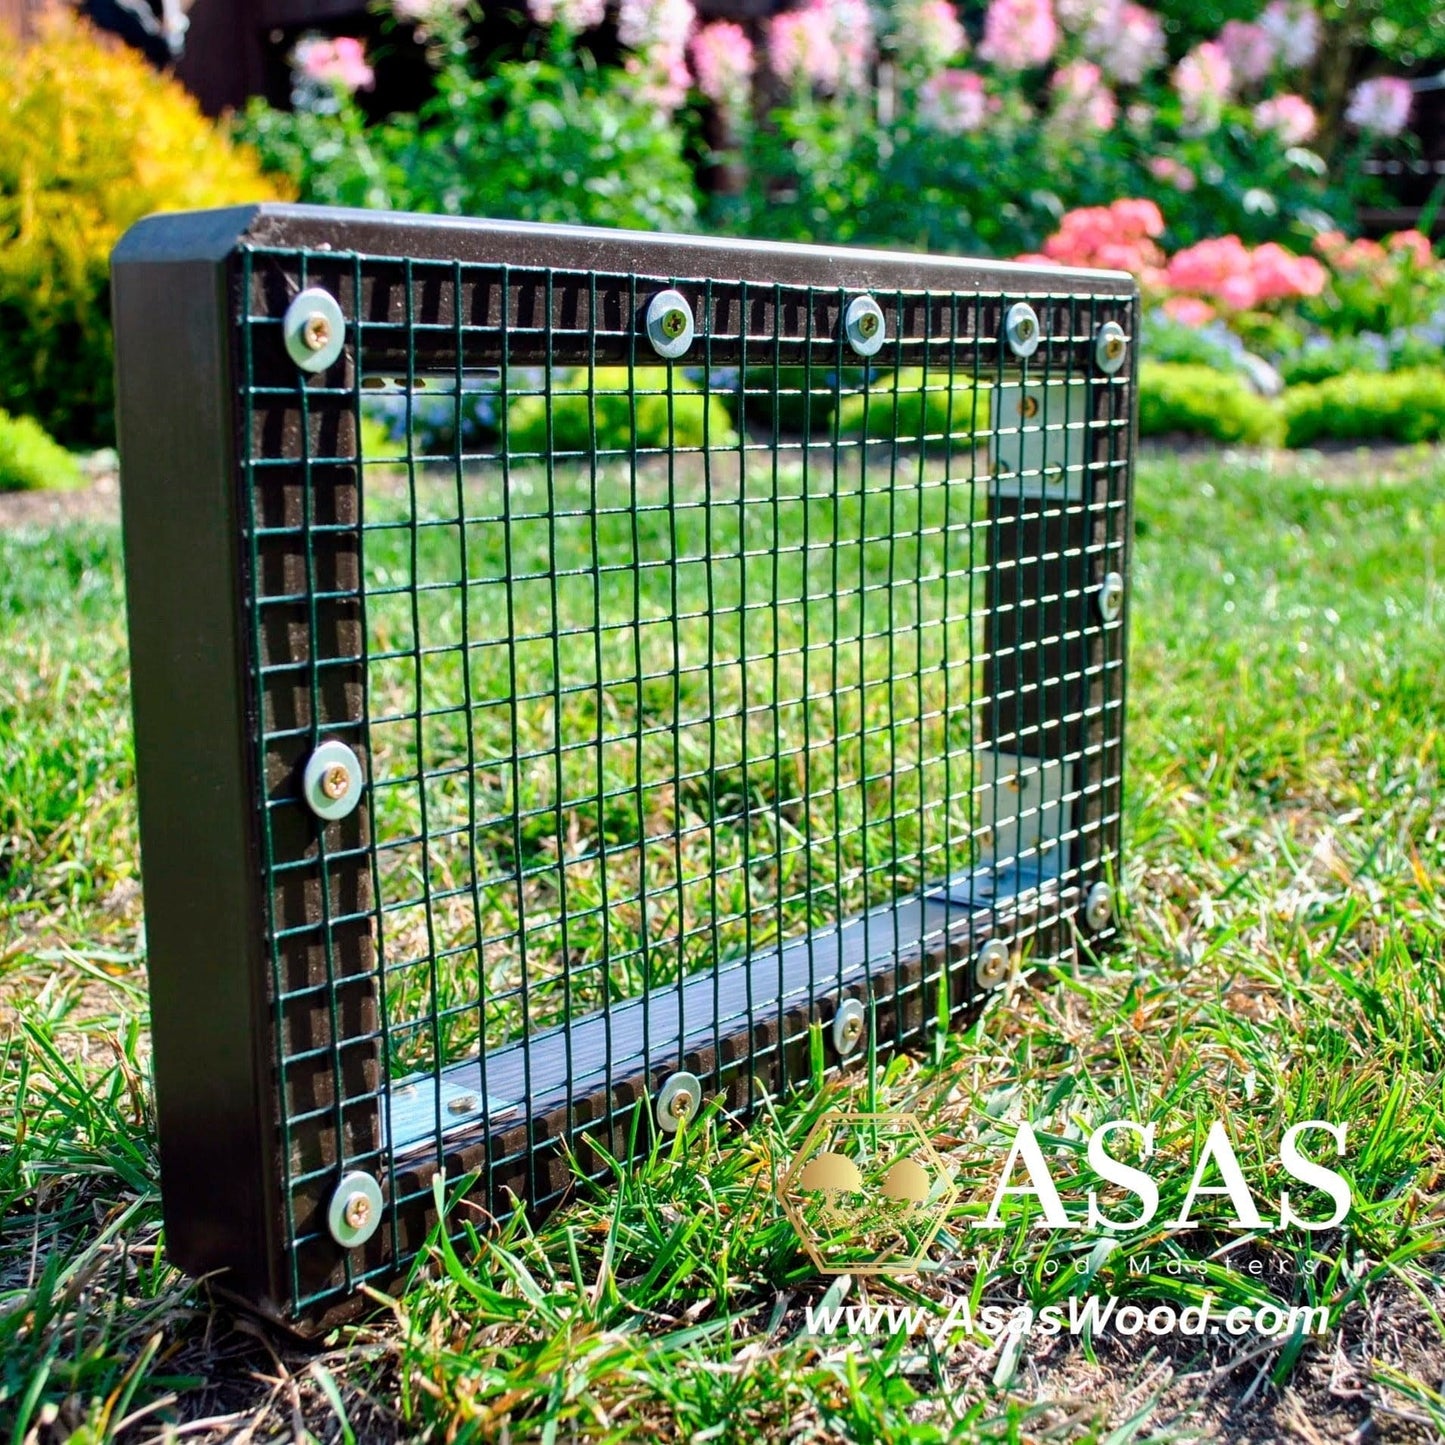 wire mesh grid for bunny litter box, green grass and flowers behind the wire mesh